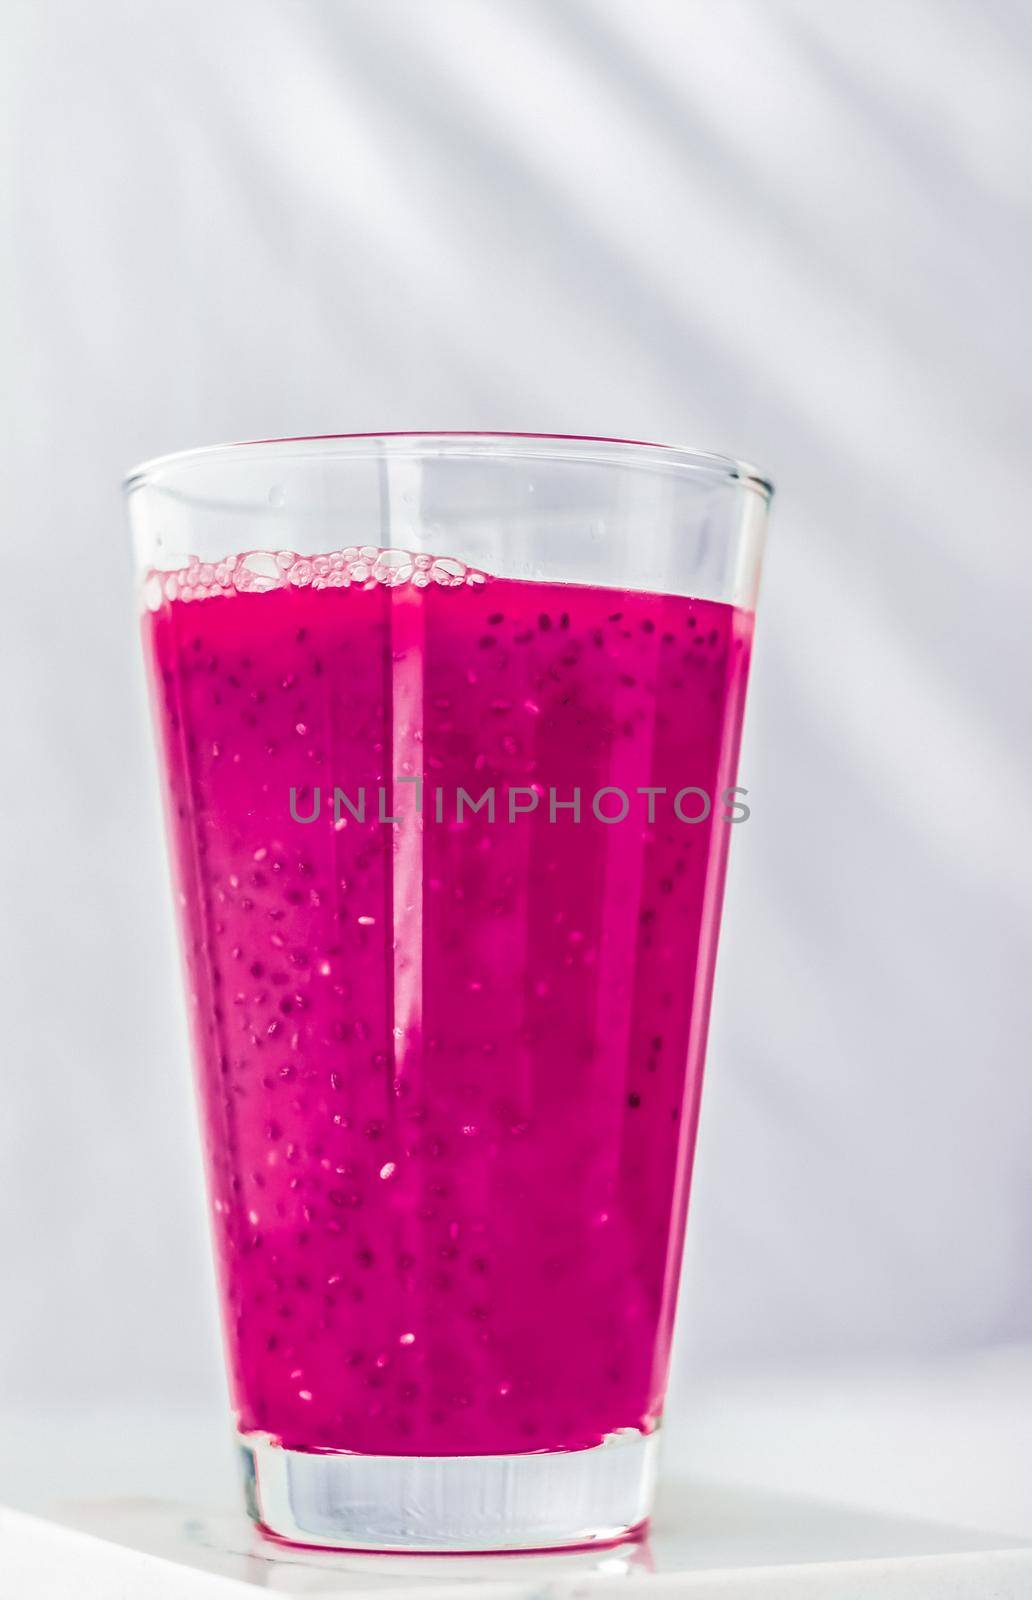 Branding, fasting and cleanse concept - Berry fruit juice in glass, vegan smoothie with chia for diet detox drink and healthy natural breakfast recipe, organic exotic food and nutrition brand design